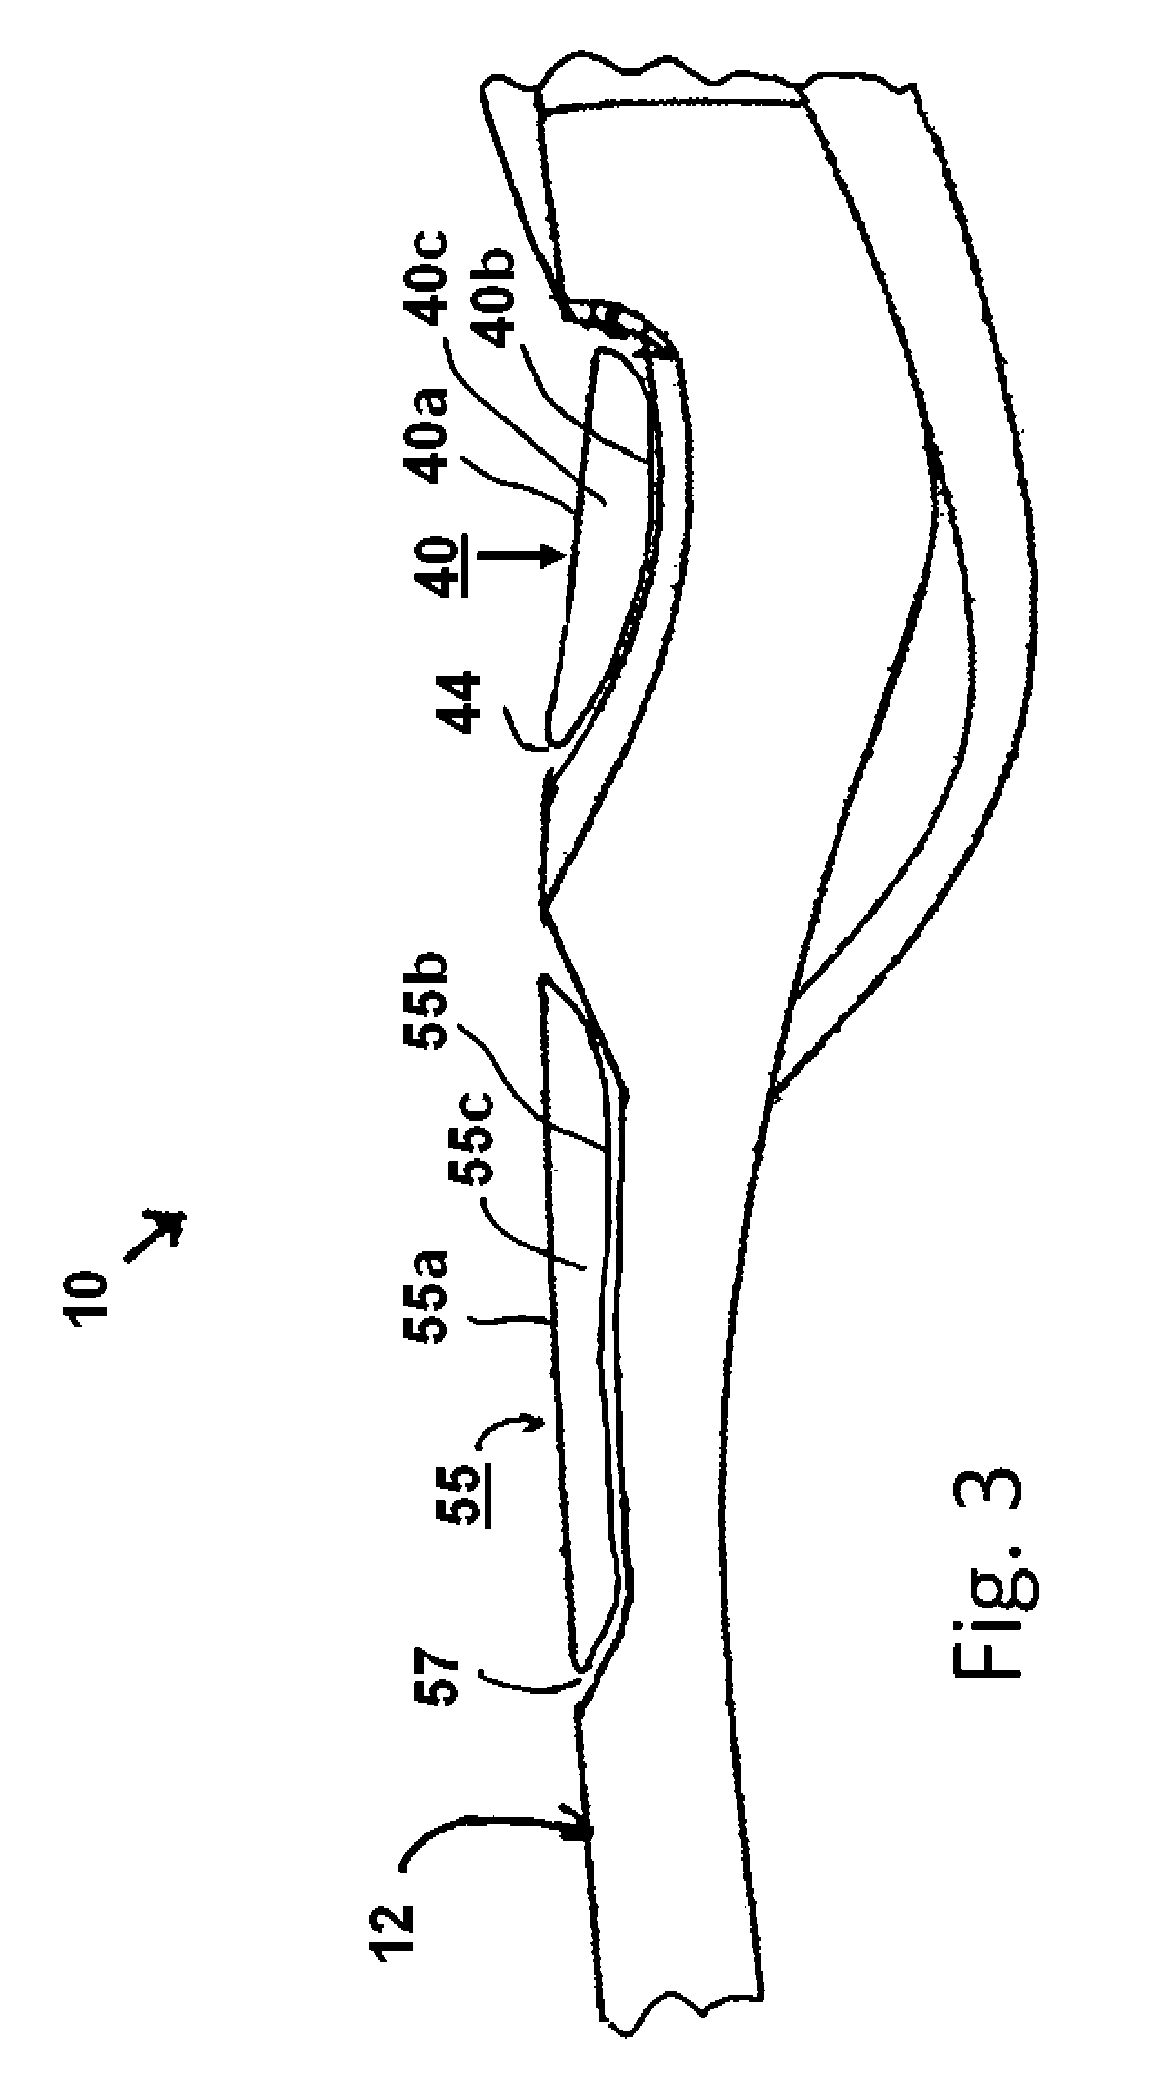 Bicycle seat for protecting ischial tuberosities